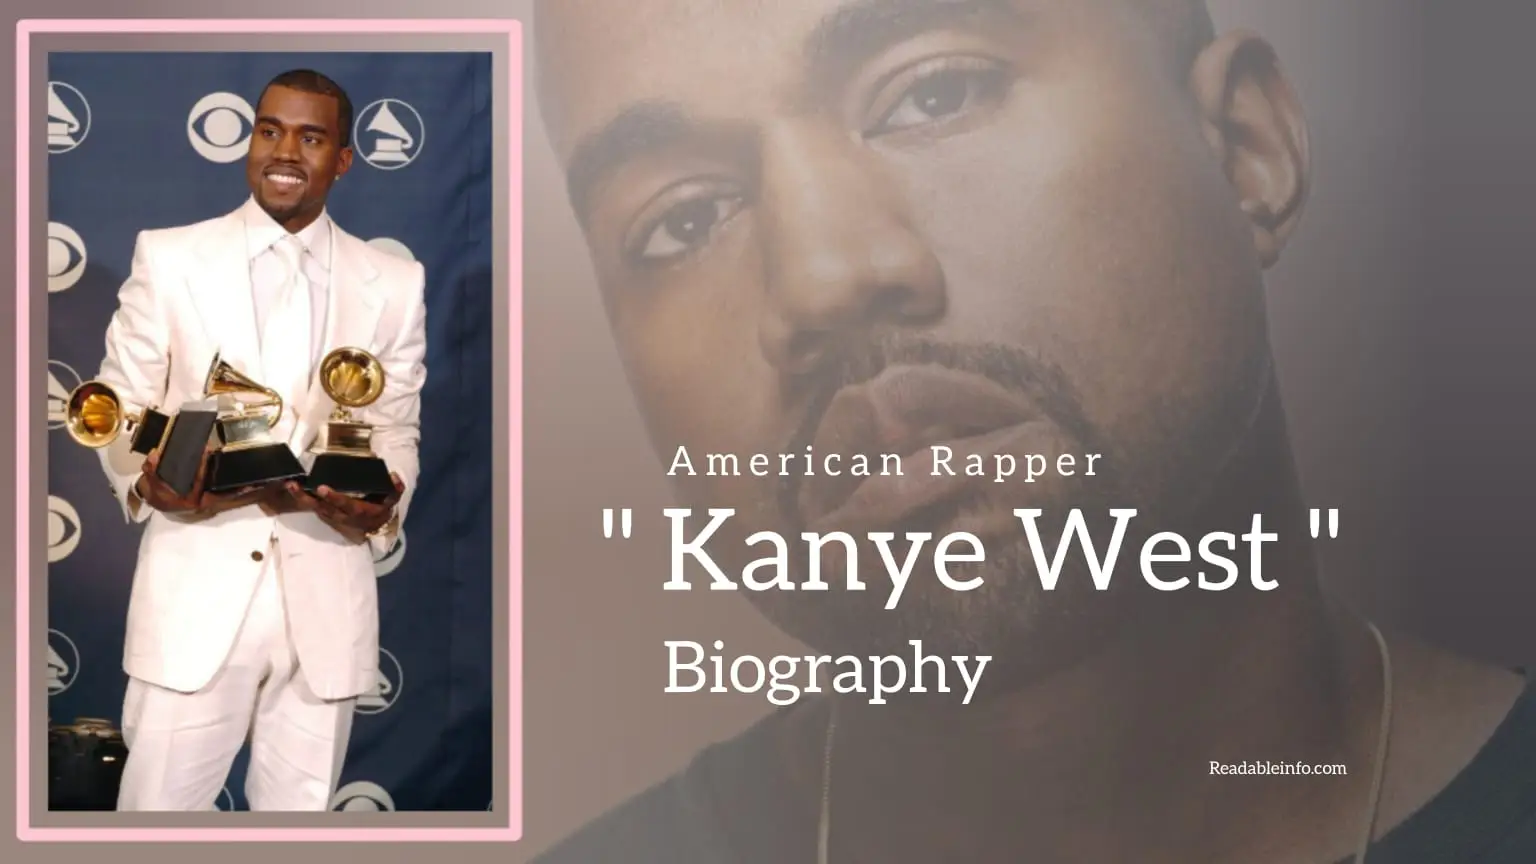 You are currently viewing Kanye West Biography (American Rapper)